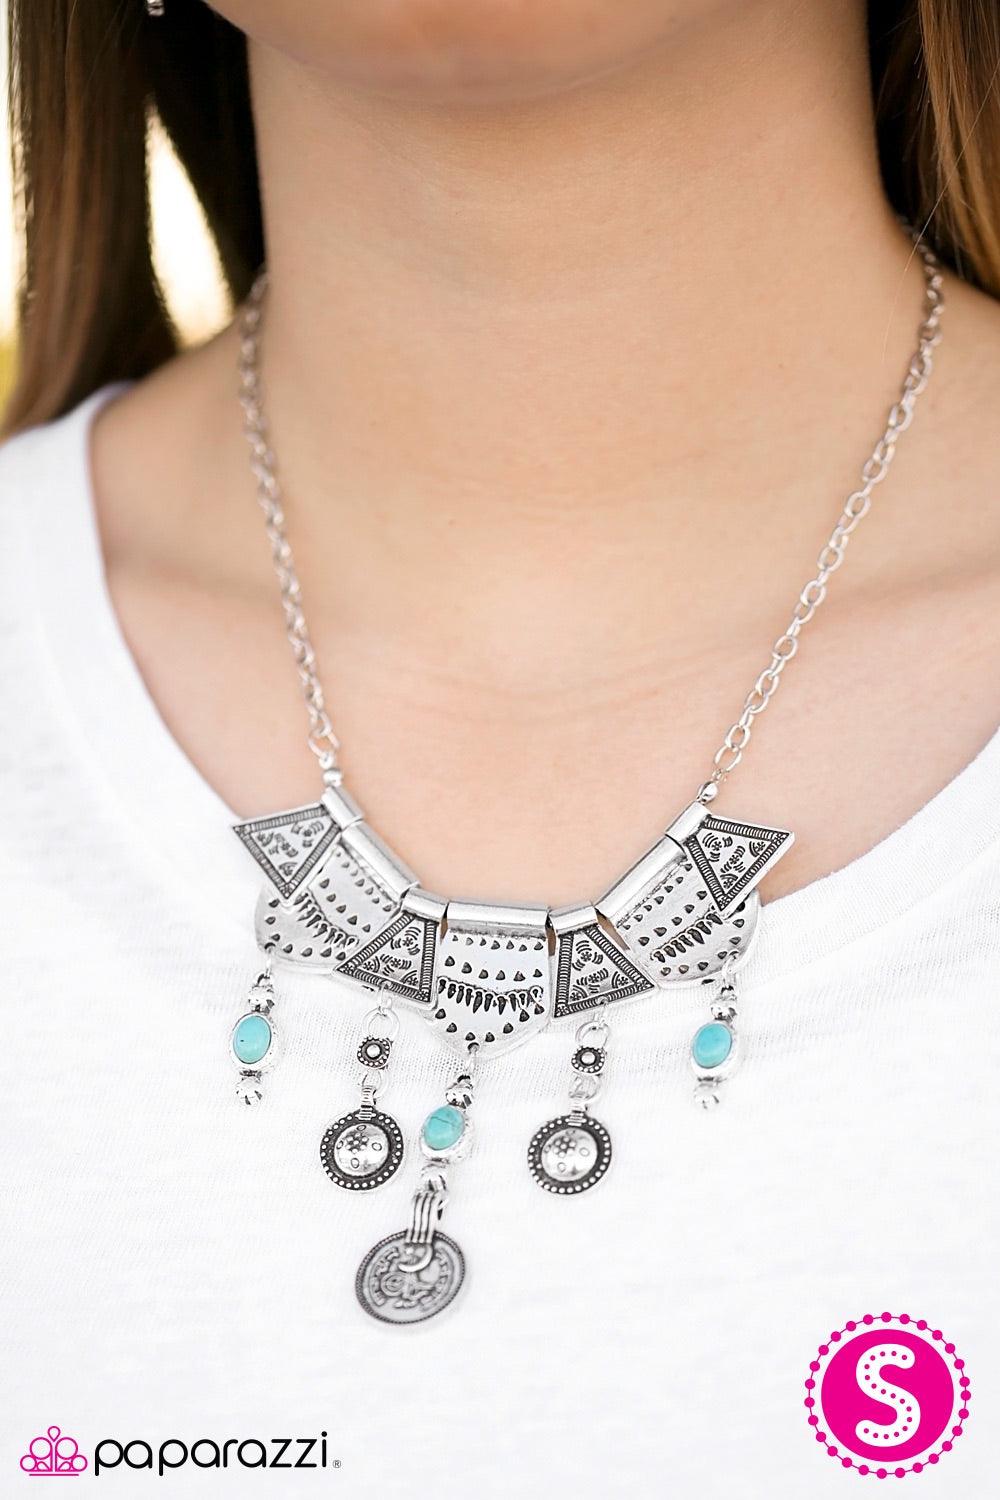 Paparazzi Accessories Paradise Princess - Blue Delicately hammered and etched with tribal patterns, shiny silver plates fan out below the collar in an indigenous fashion. Brushed in an antiqued shimmer, turquoise stone accents swing from the bottom of the